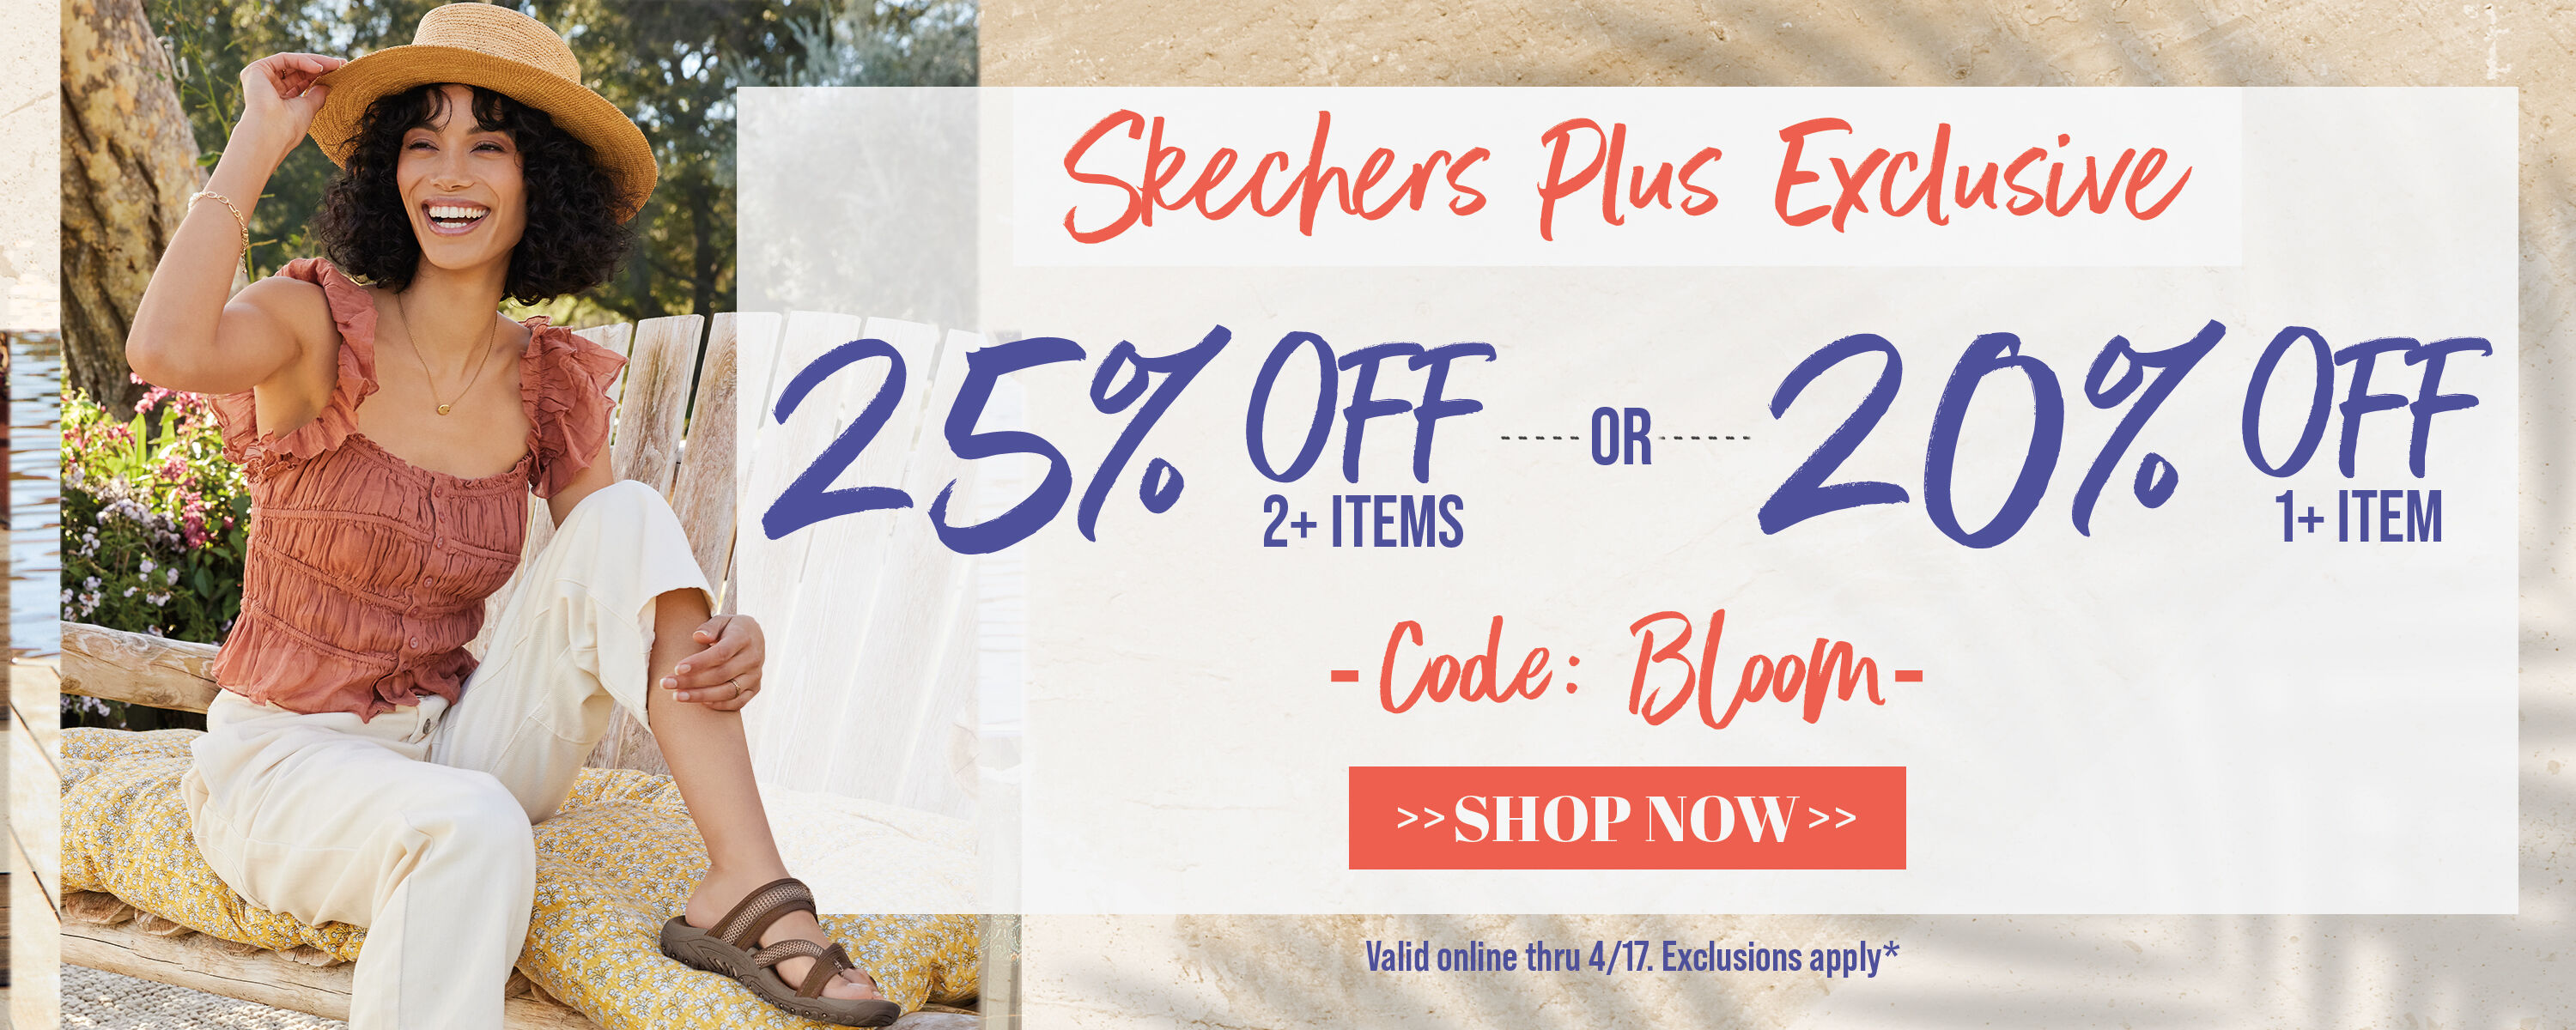 Skechers Plus Exclusive! 25% off 2+ items or 20% off 1 item ~ SHOP NOW